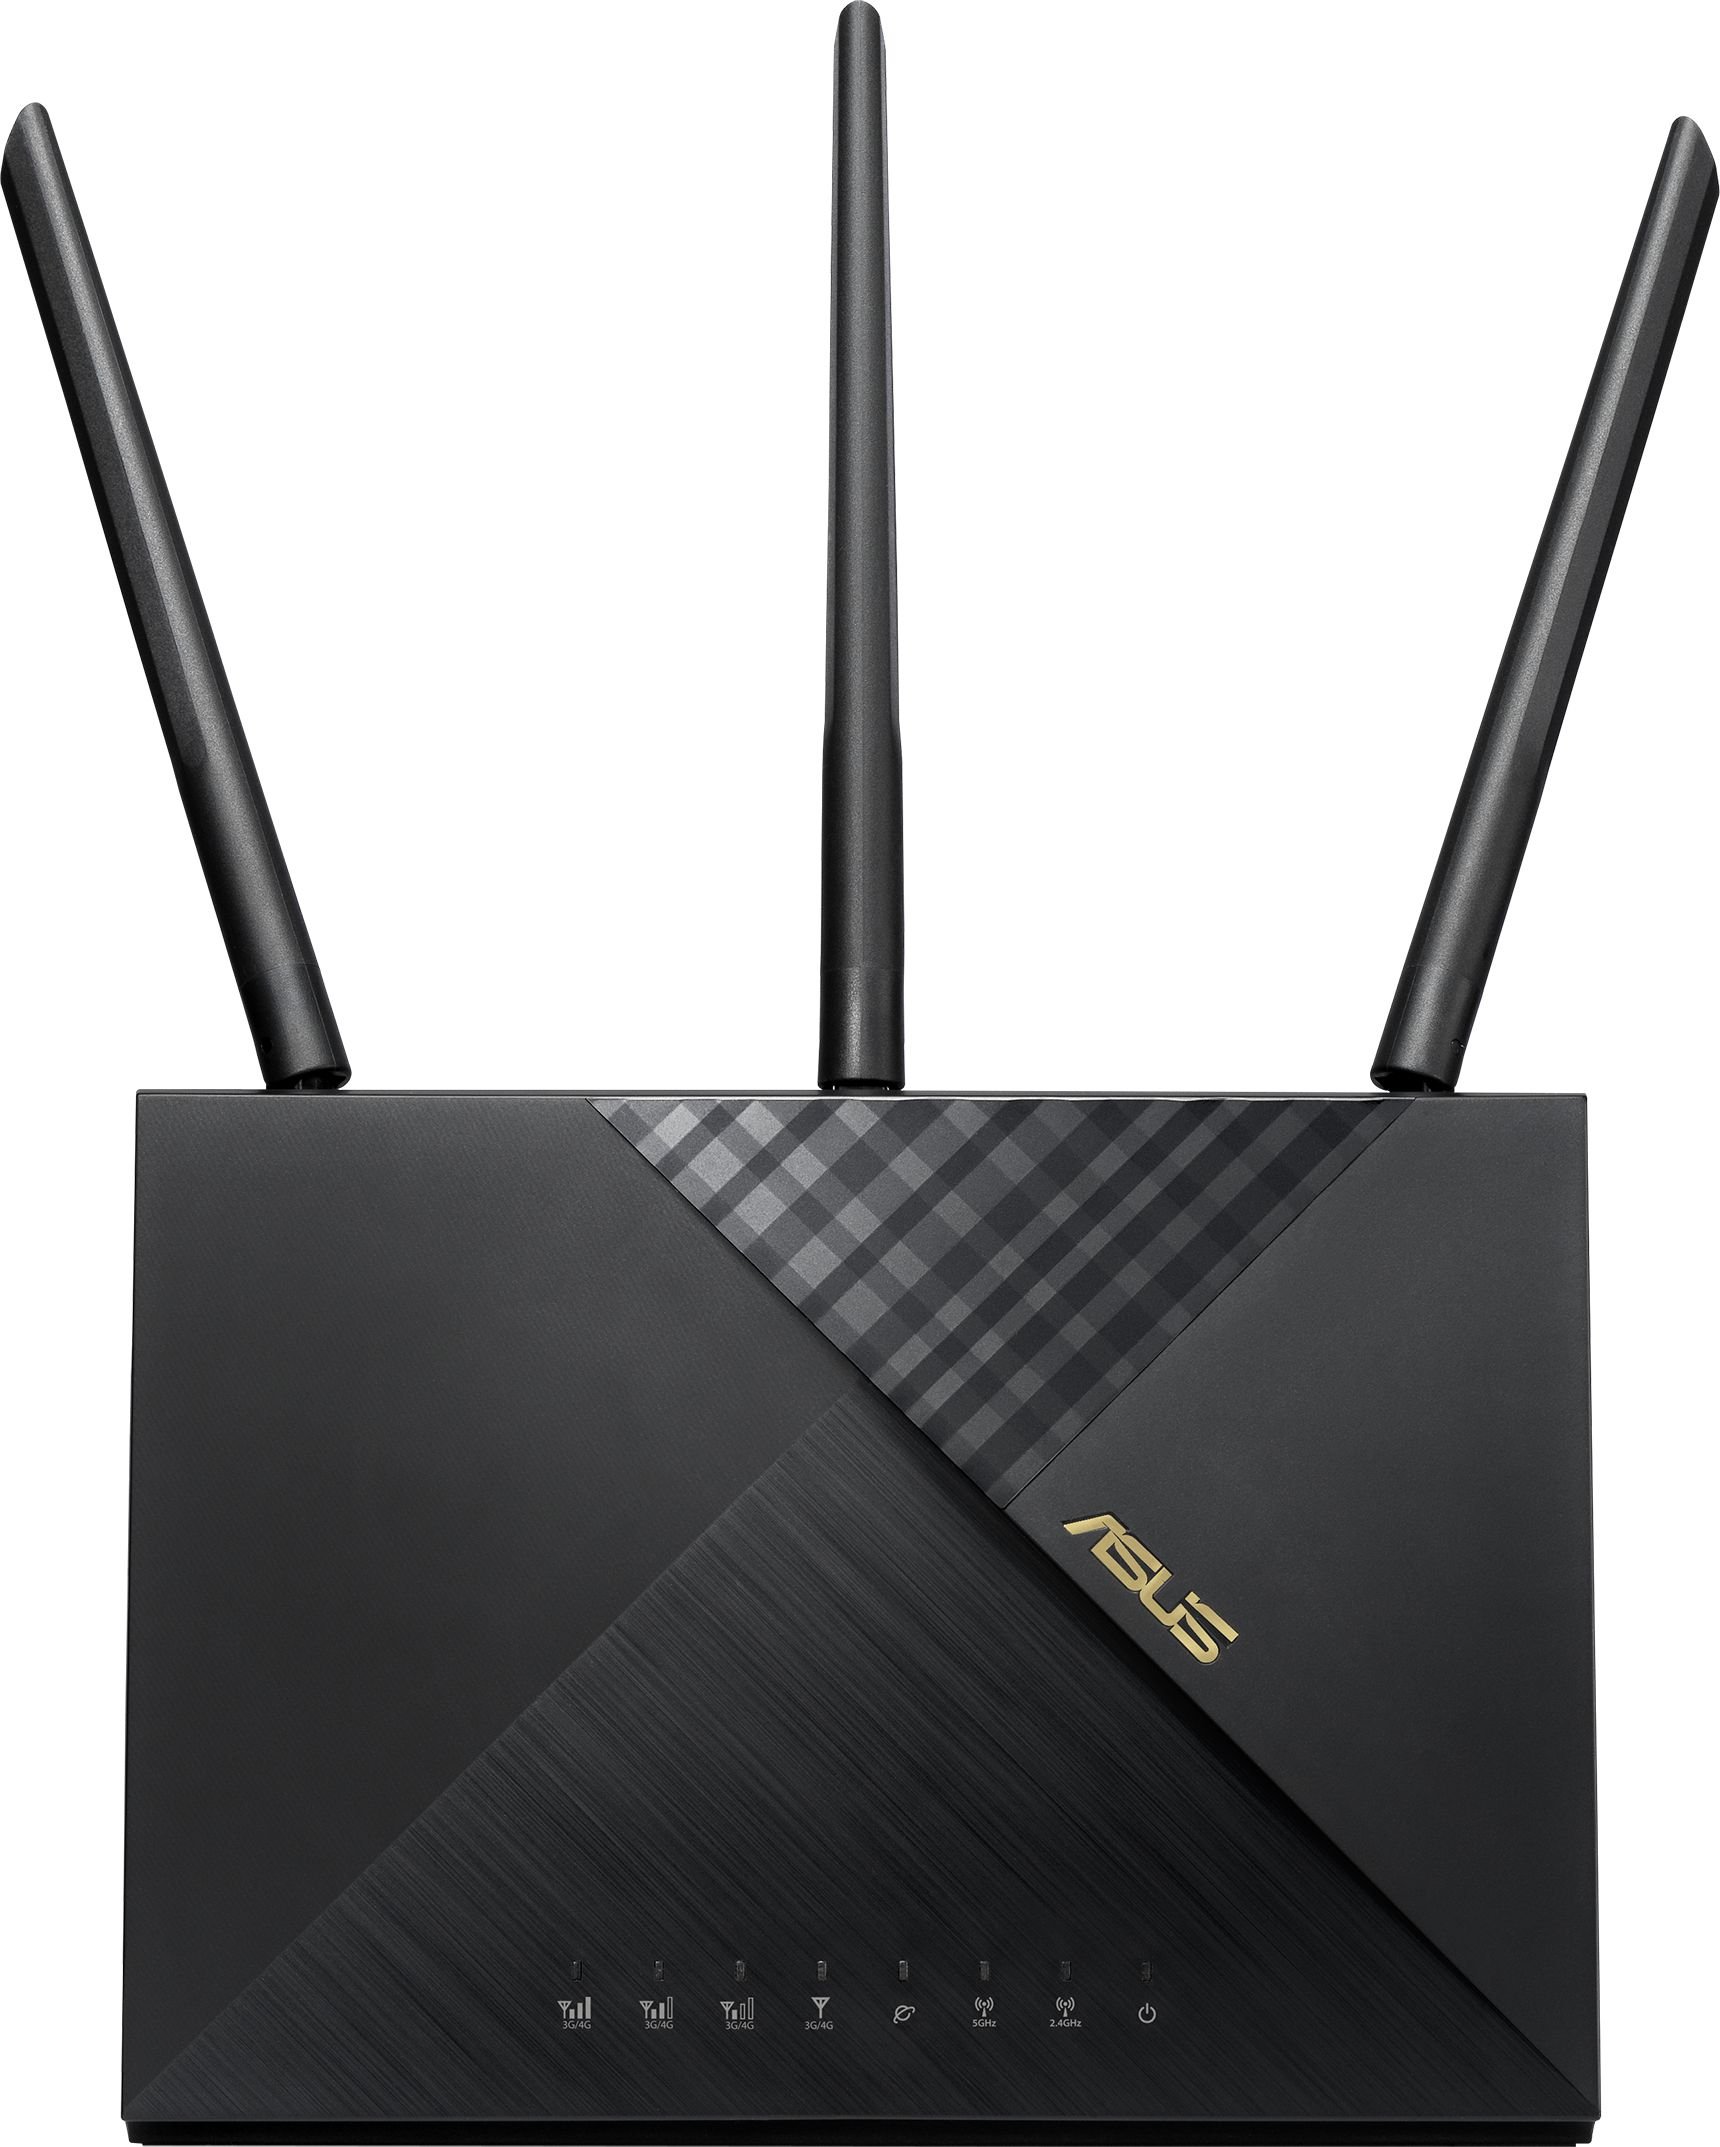 Routere - Router ASUS 4G-AX56, AX1800, Wi-Fi 6, Dual-band, 4G LTE, 3 antene Wi-Fi